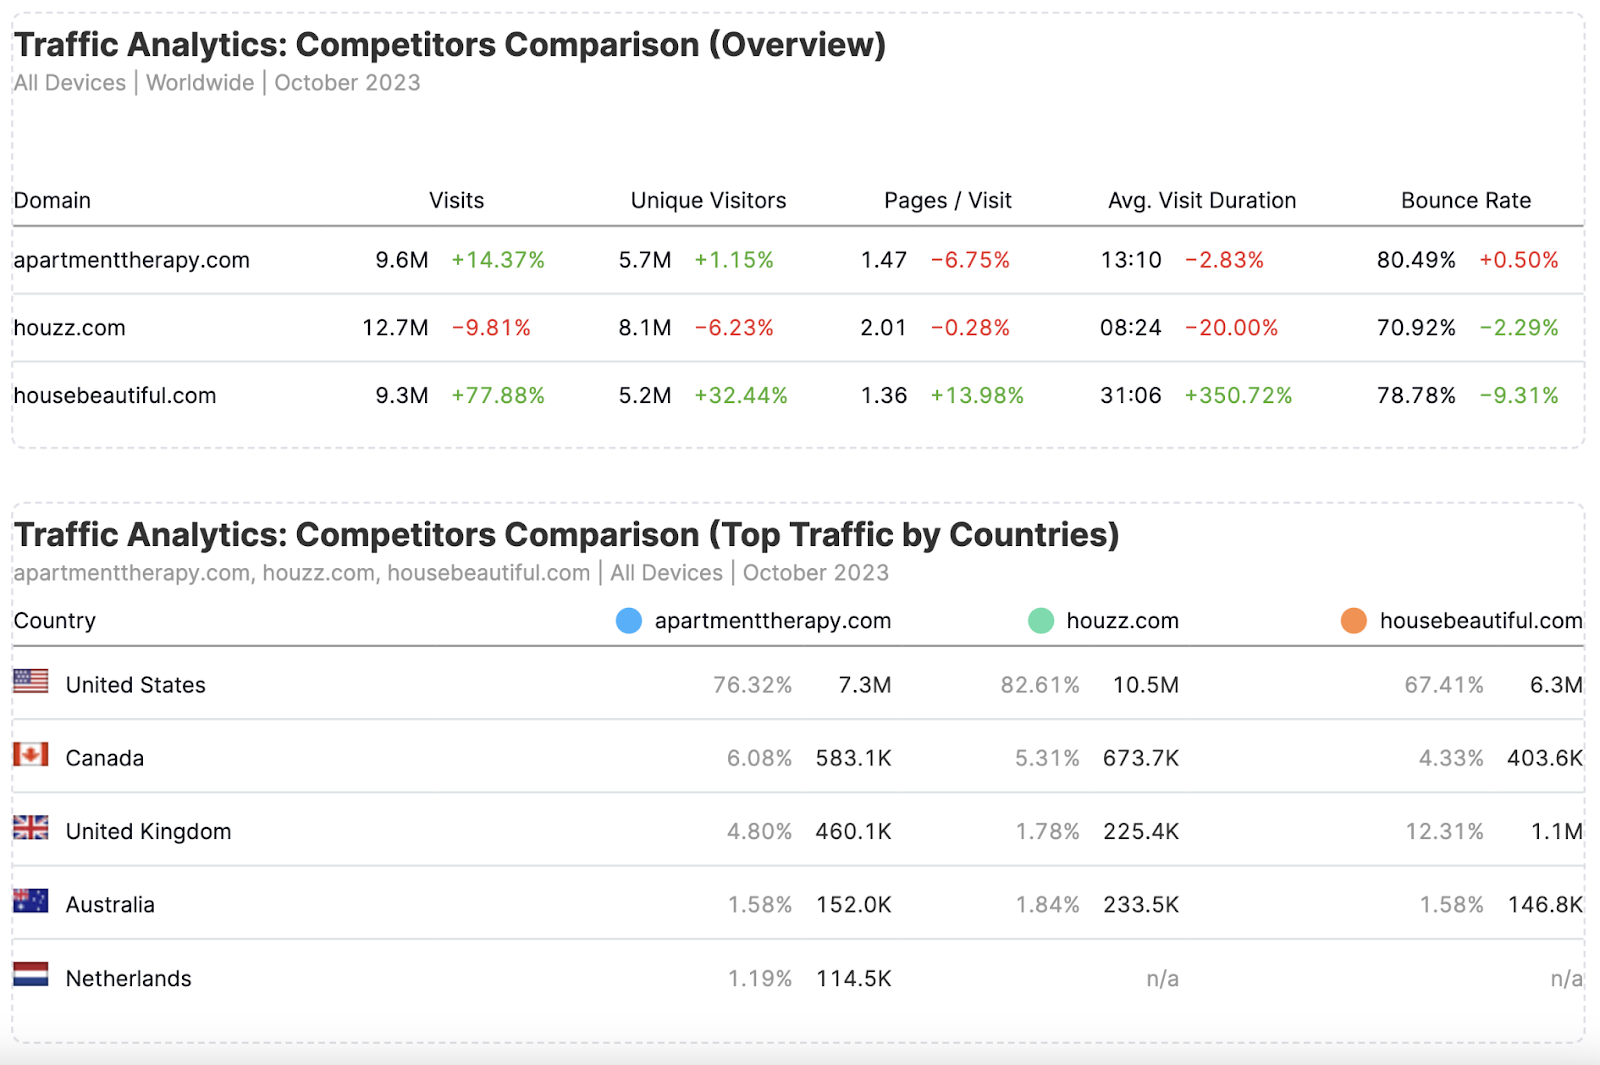 "Traffic Analytics: Competitors Comparison (Overview and Top Traffic by Countries)" sections of the report